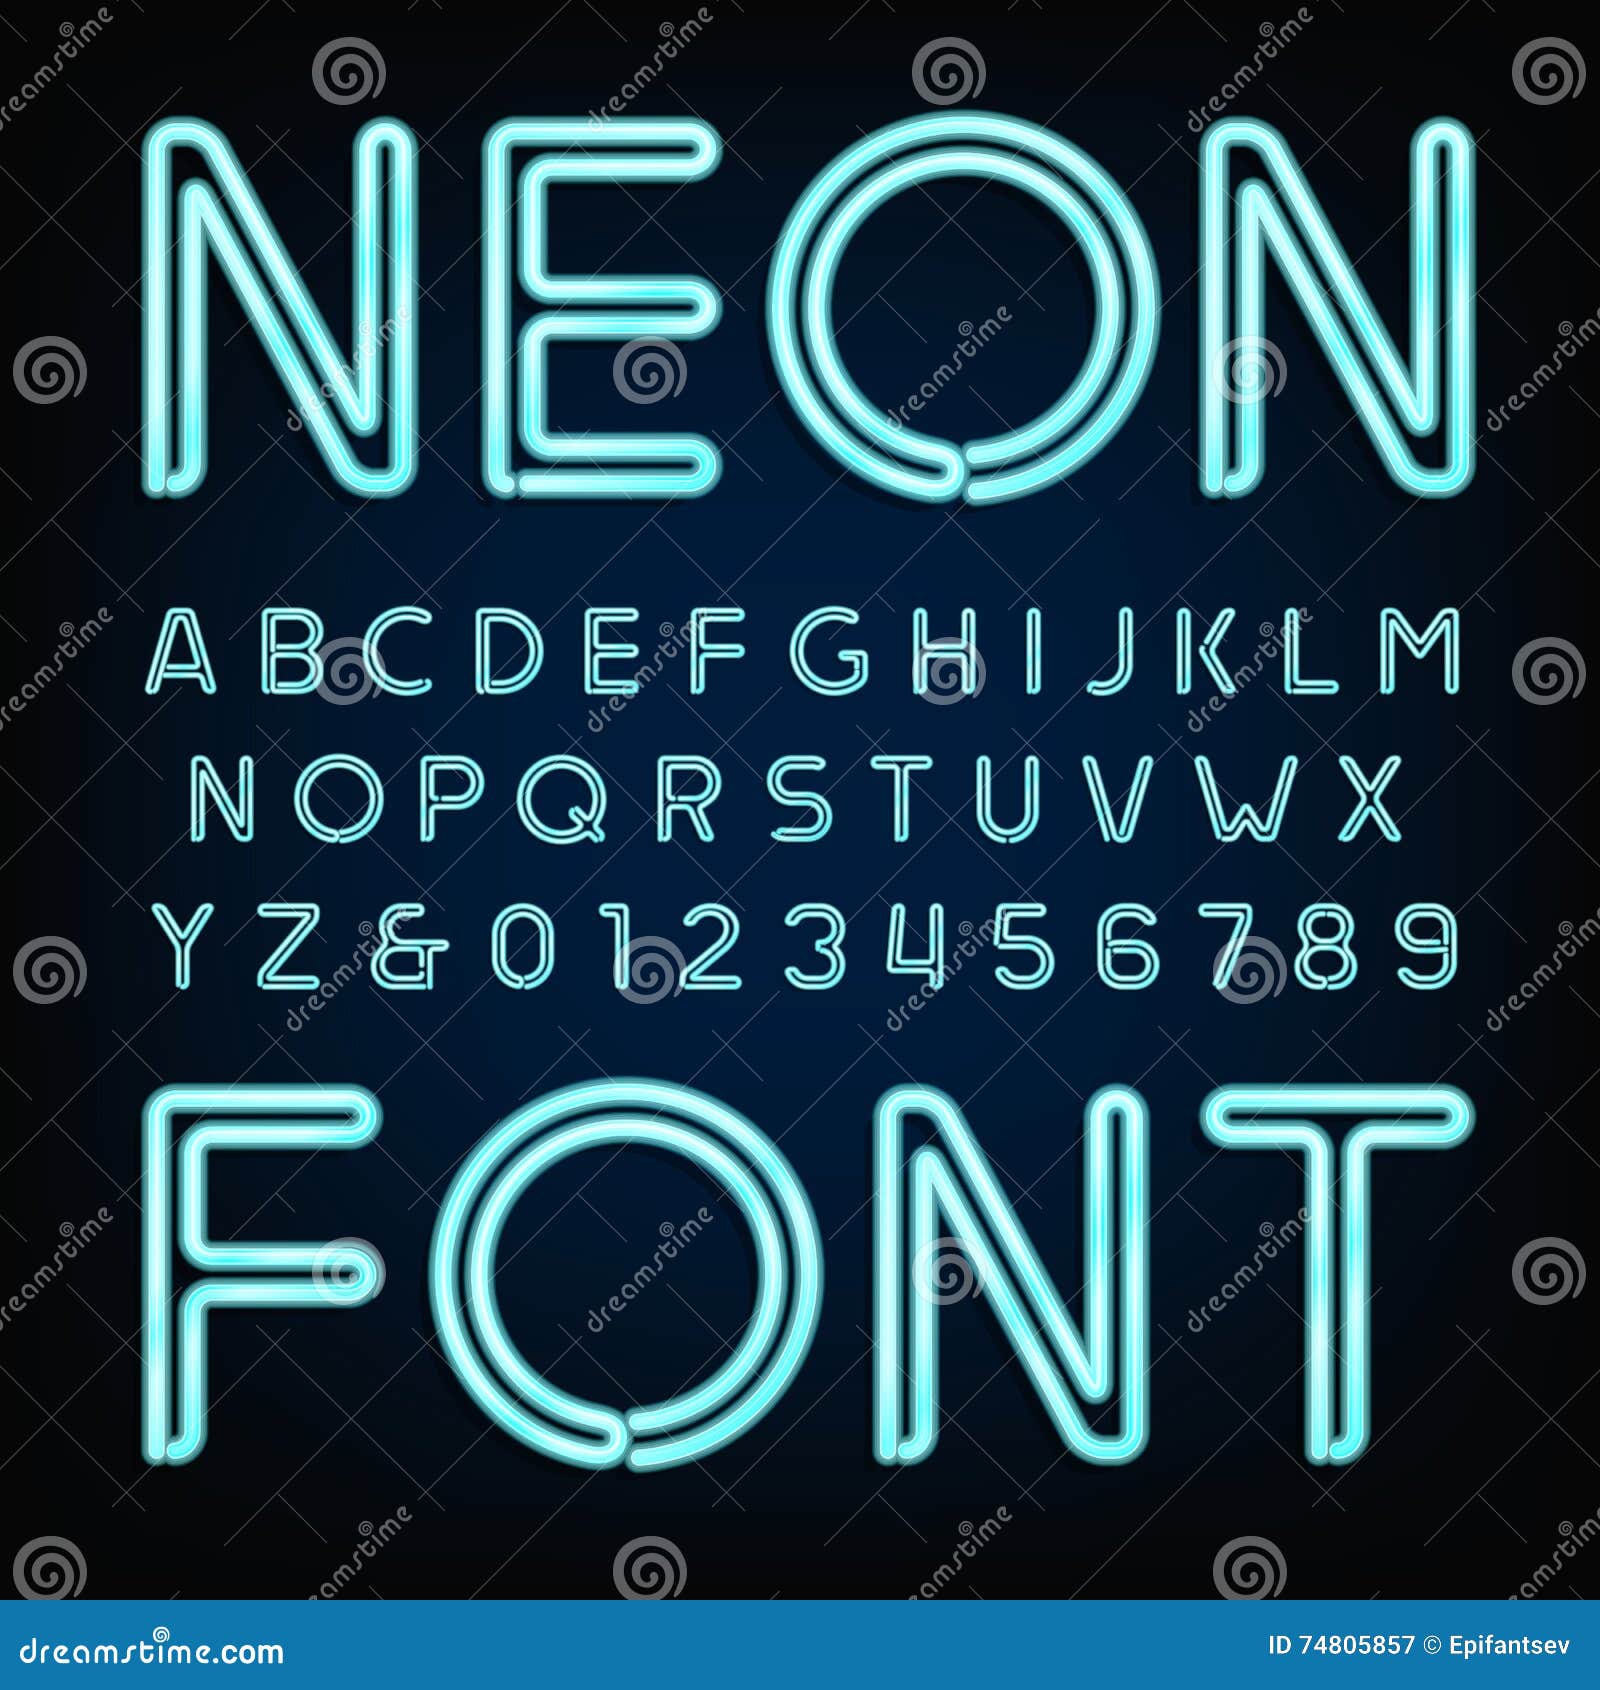 Neon Tube Alphabet Font. Type Letters and Numbers. Stock Vector ...